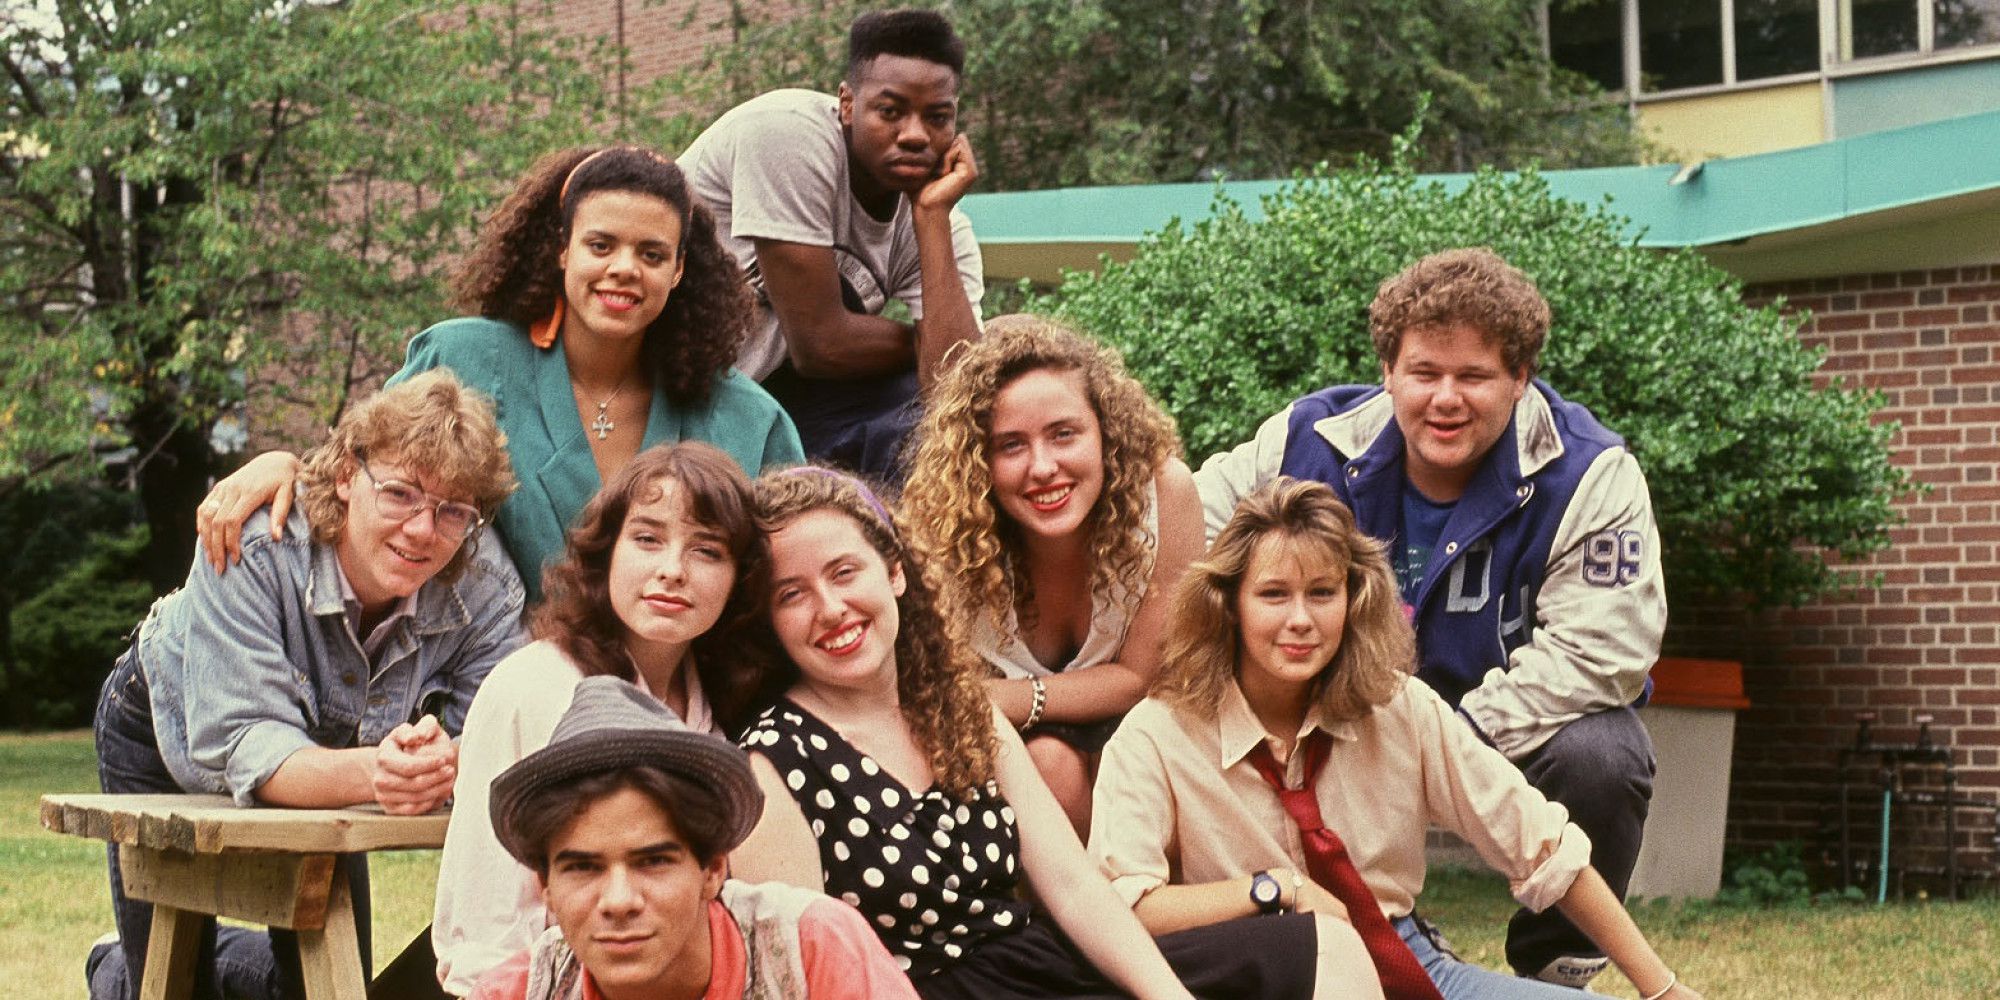 The cast of Degrassi High